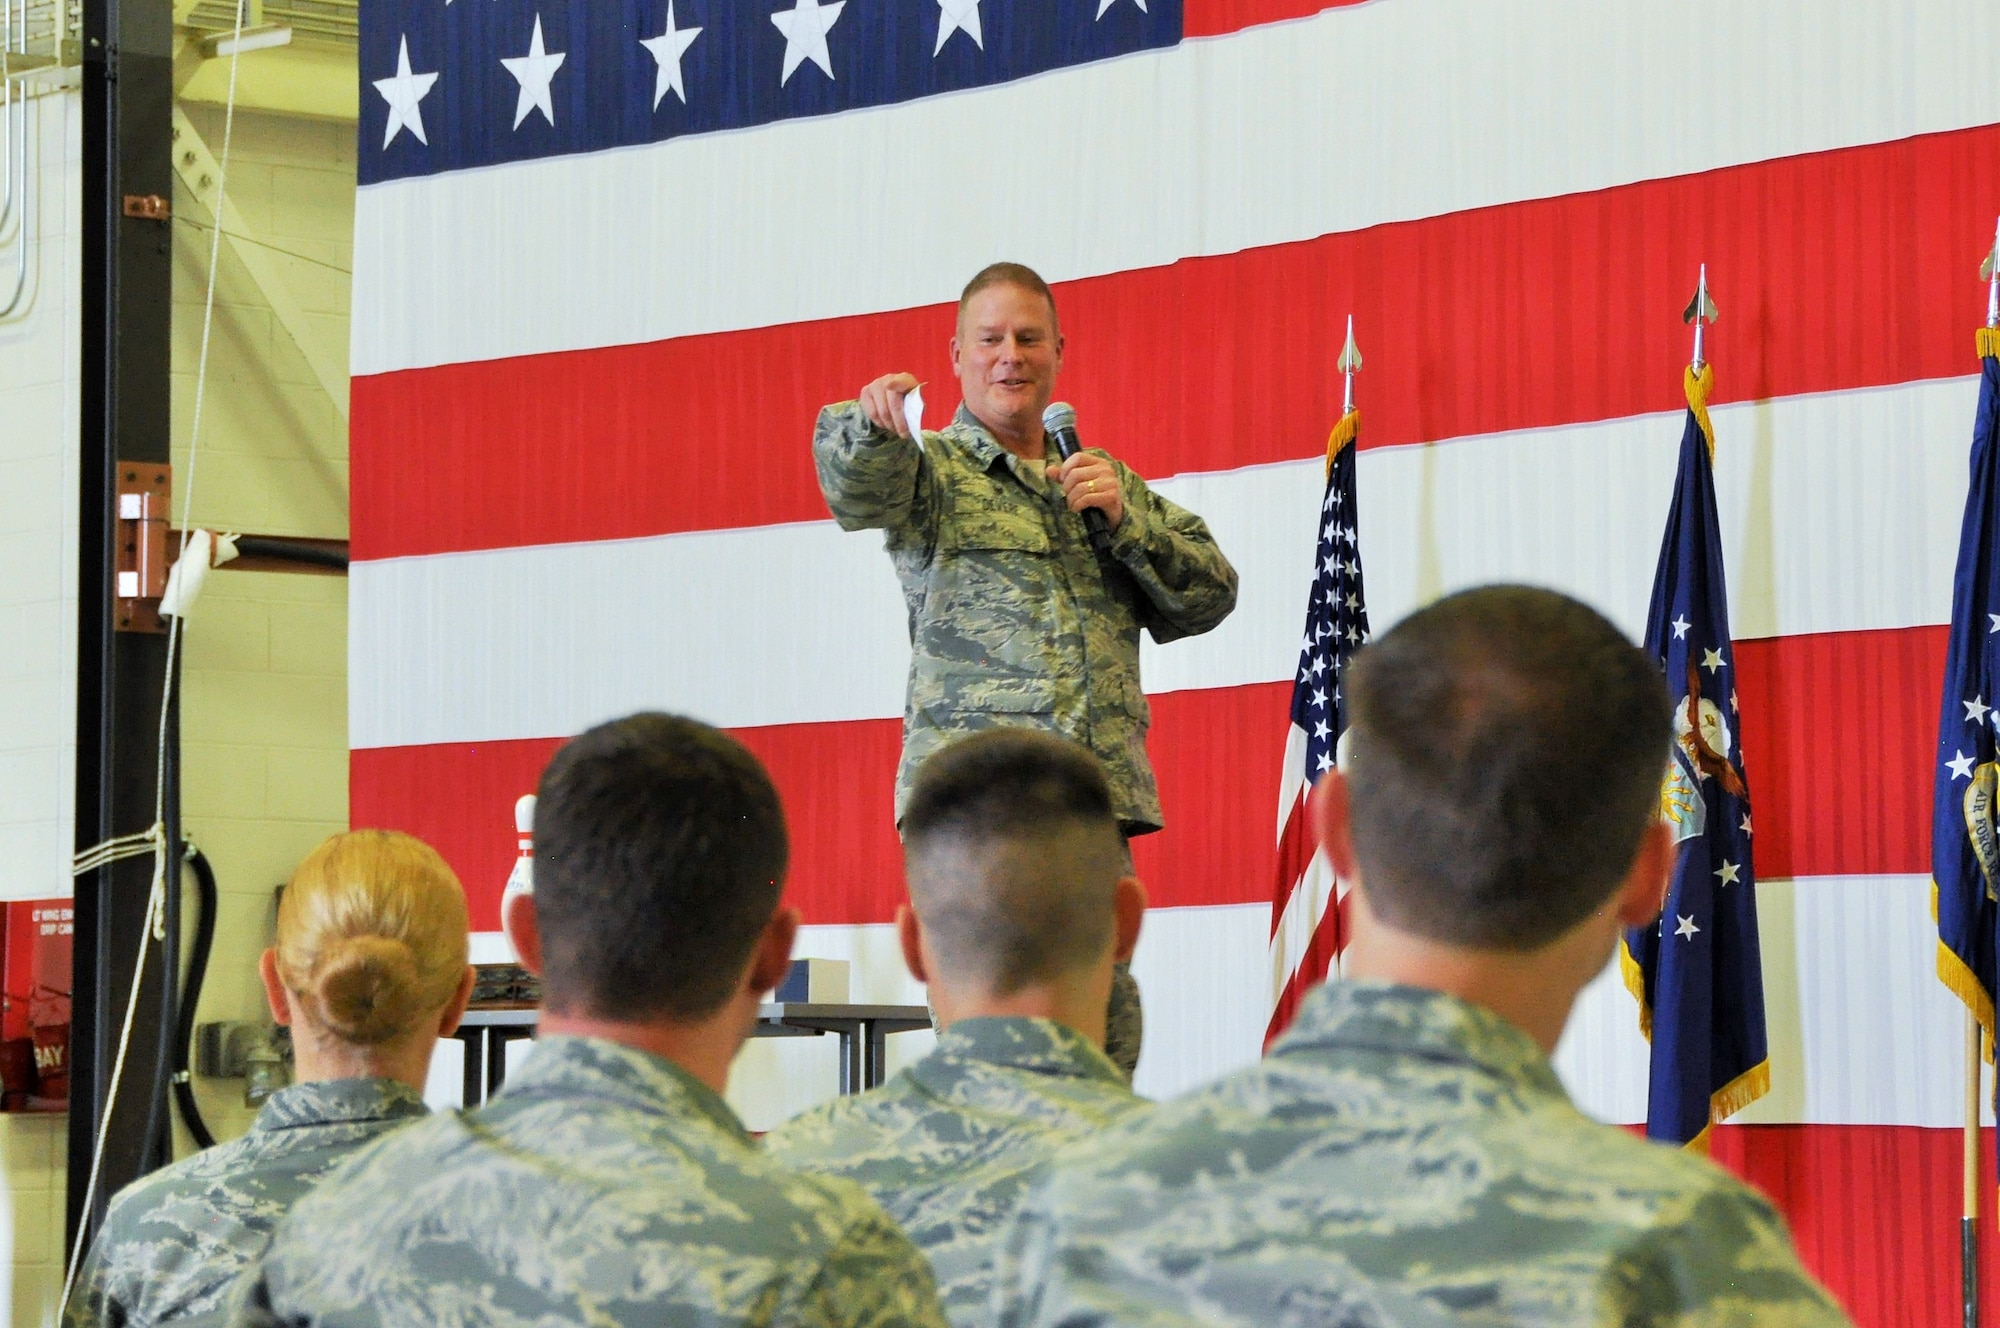 Col. James DeVere, the 302nd Airlift Wing commander, addresses an audience of more than 900 of the wing’s Reserve Citizen Airmen at a commander’s call held during the monthly Unit Training Assembly at Peterson Air Force Base, Colo., May 7, 2017. The commander’s call wrapped up with an interactive trivia game where representatives from each group answered questions related to information and practices of the 302nd AW. Afterward, Airmen were released to their respective squadrons to participate in the wing’s annual Wingman Day activities, which focused on resiliency and relationship building. (U.S. Air Force photo/Staff Sgt. Frank Casciotta)